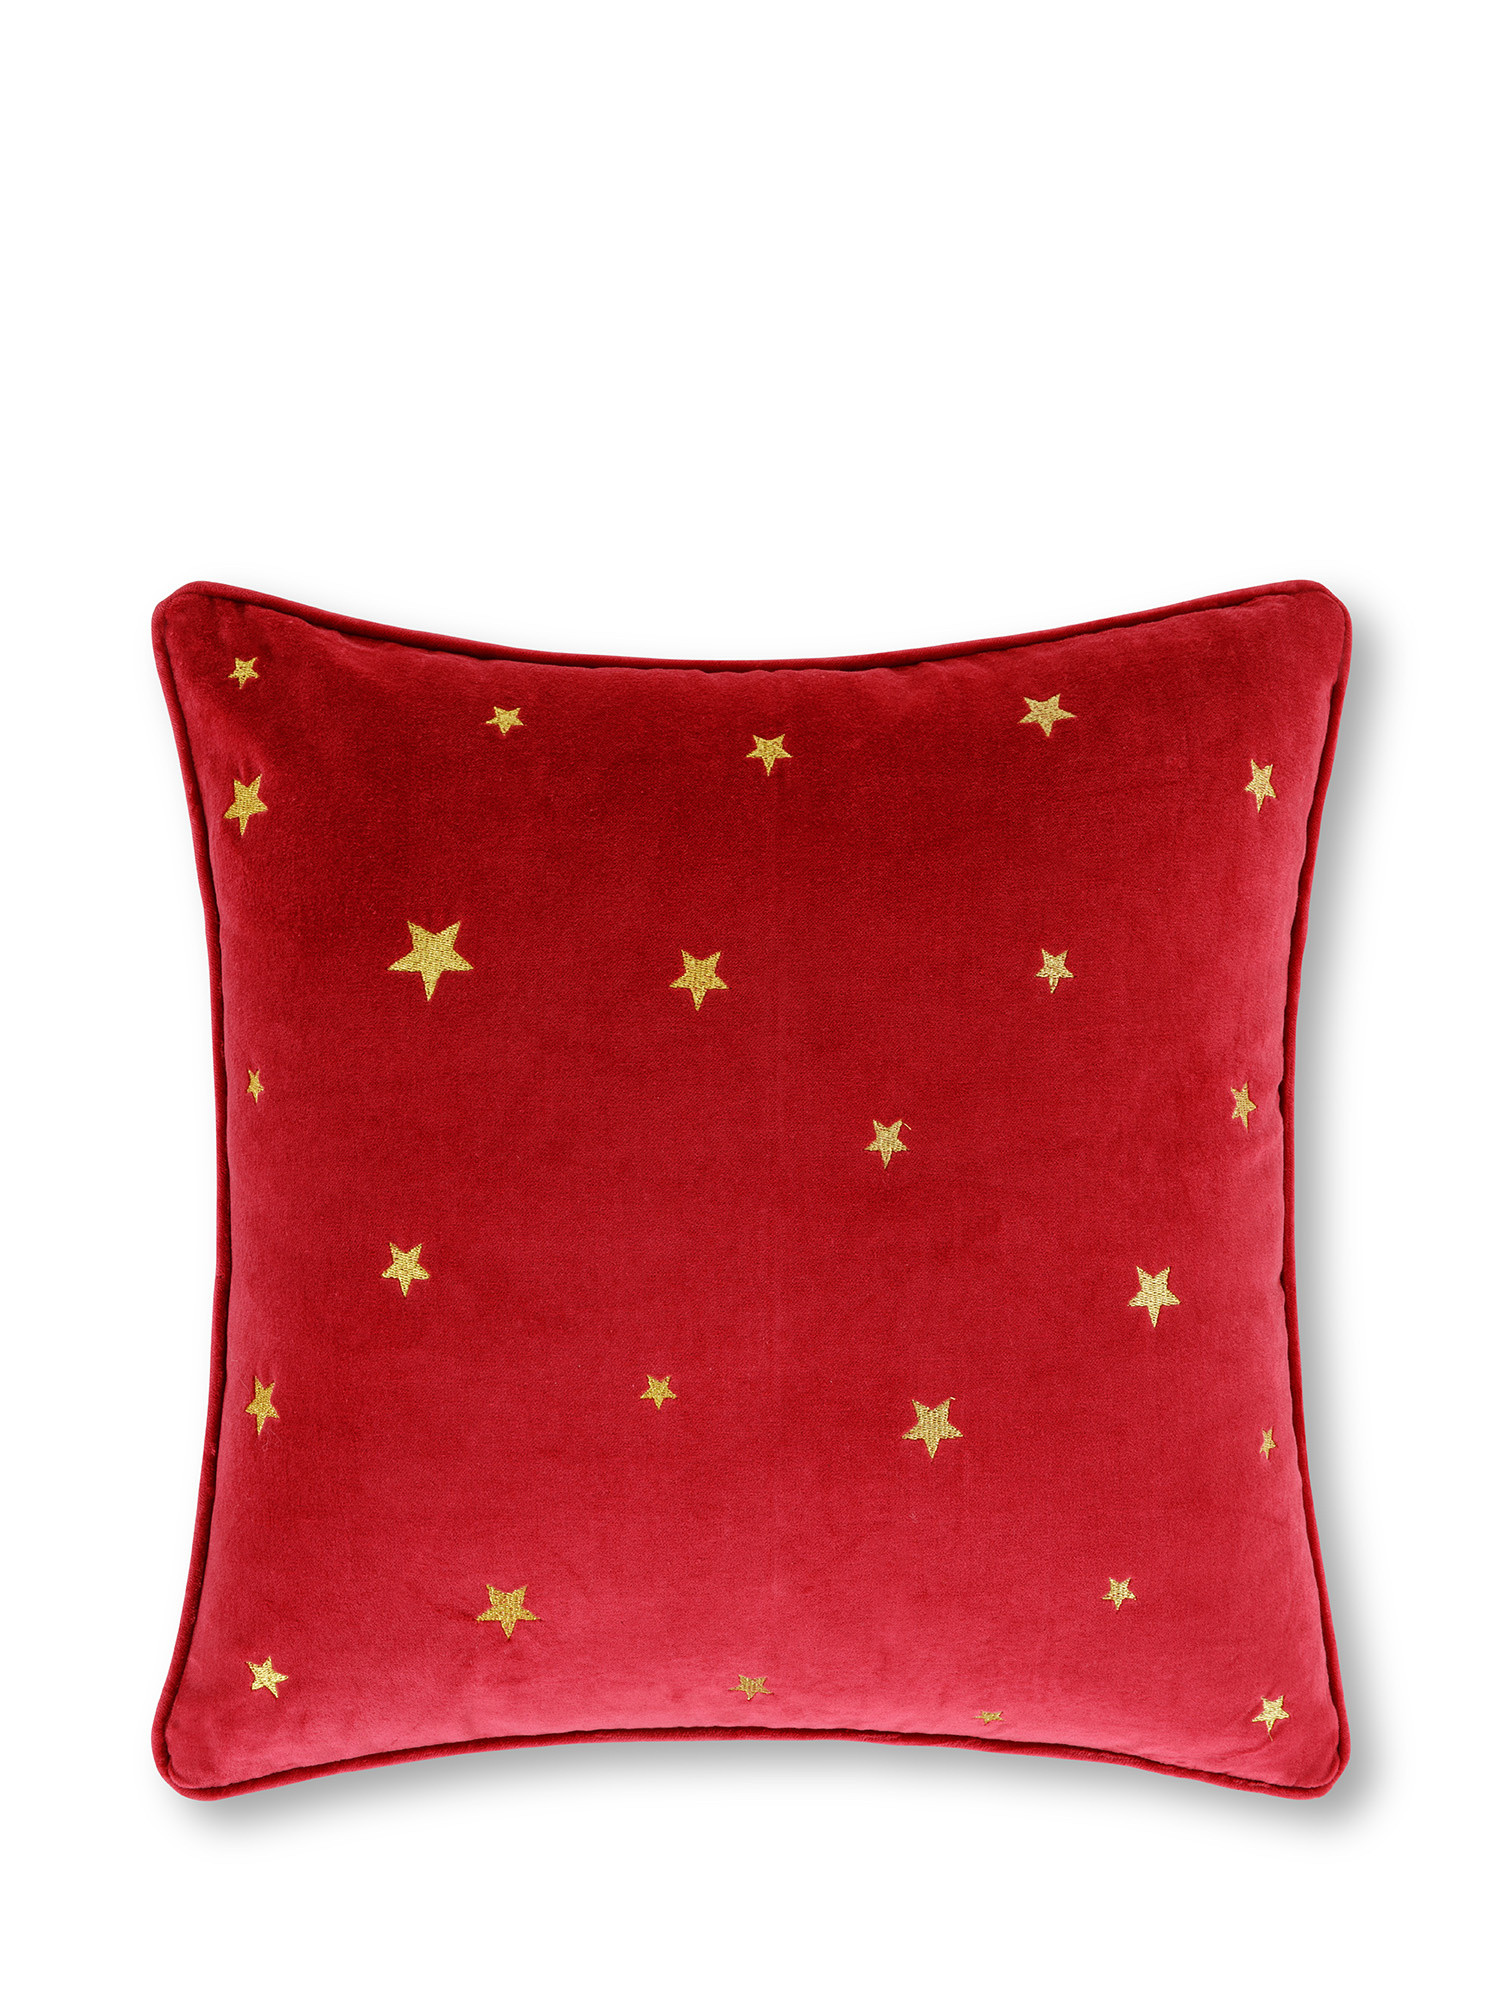 Velvet cushion with stars embroidered in lurex 45x45 cm, Red, large image number 0